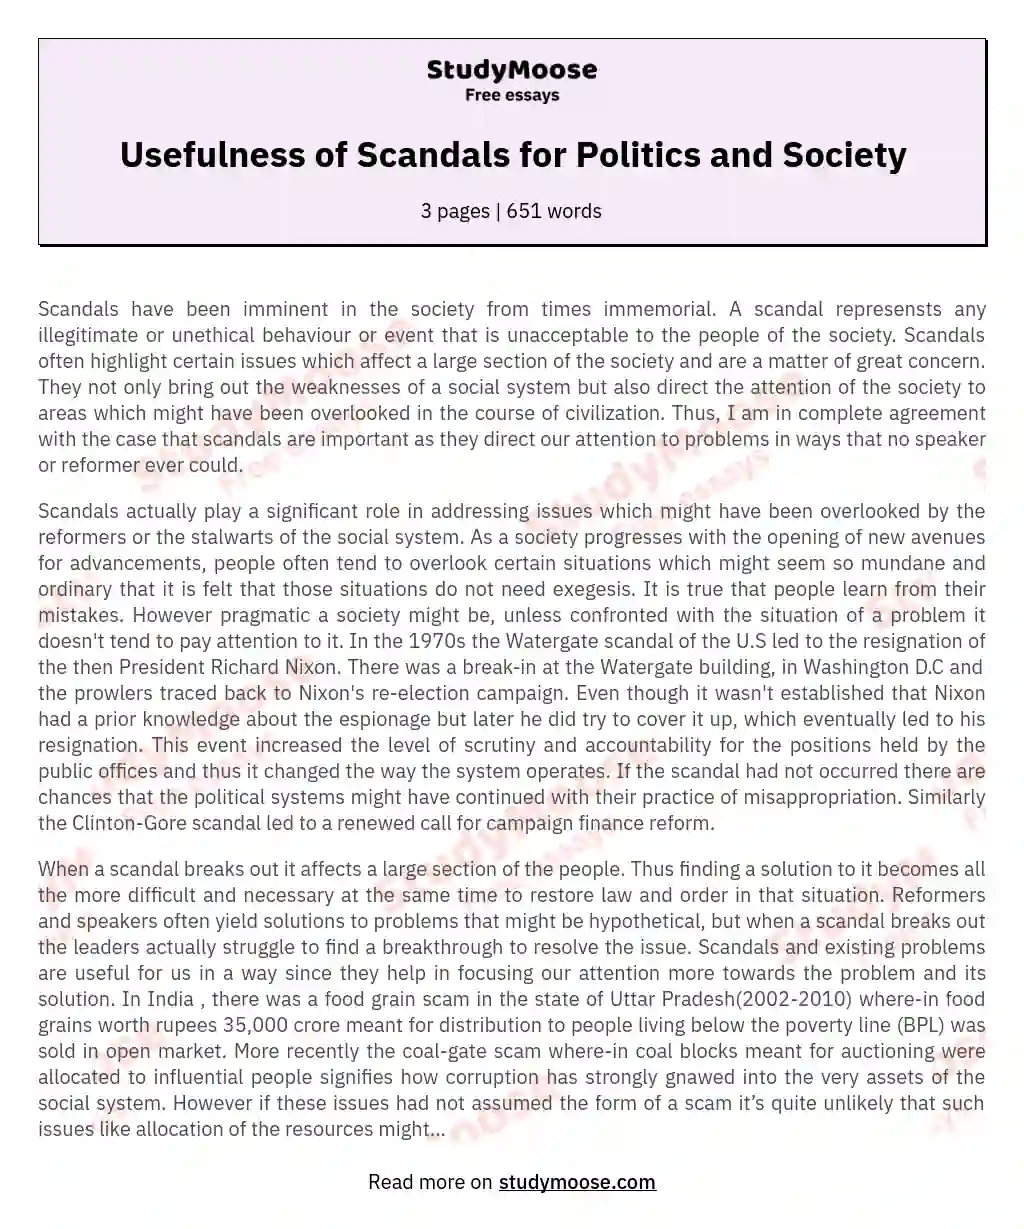 Usefulness of Scandals for Politics and Society